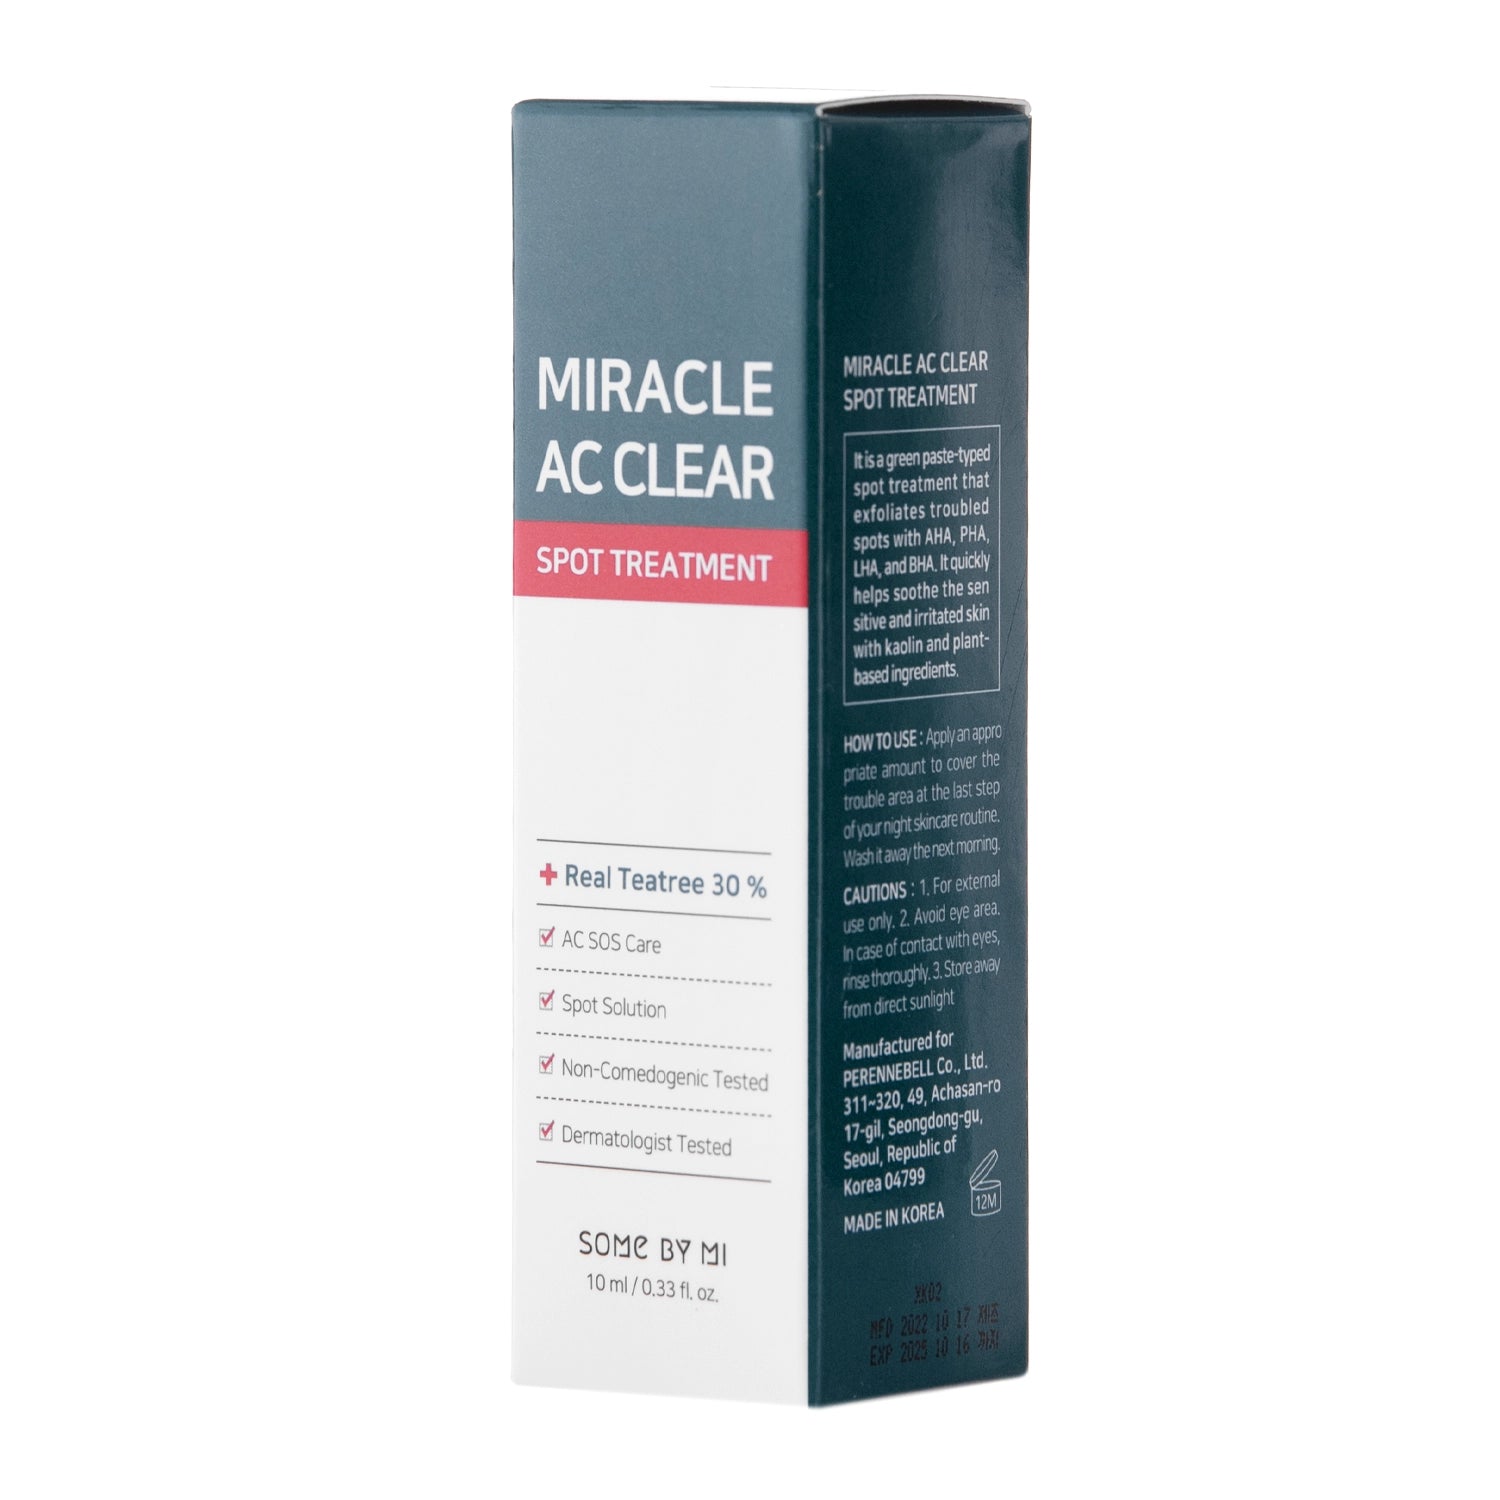 SOME BY MI Miracle AC Clear Spot Treatment 10g - DODOSKIN